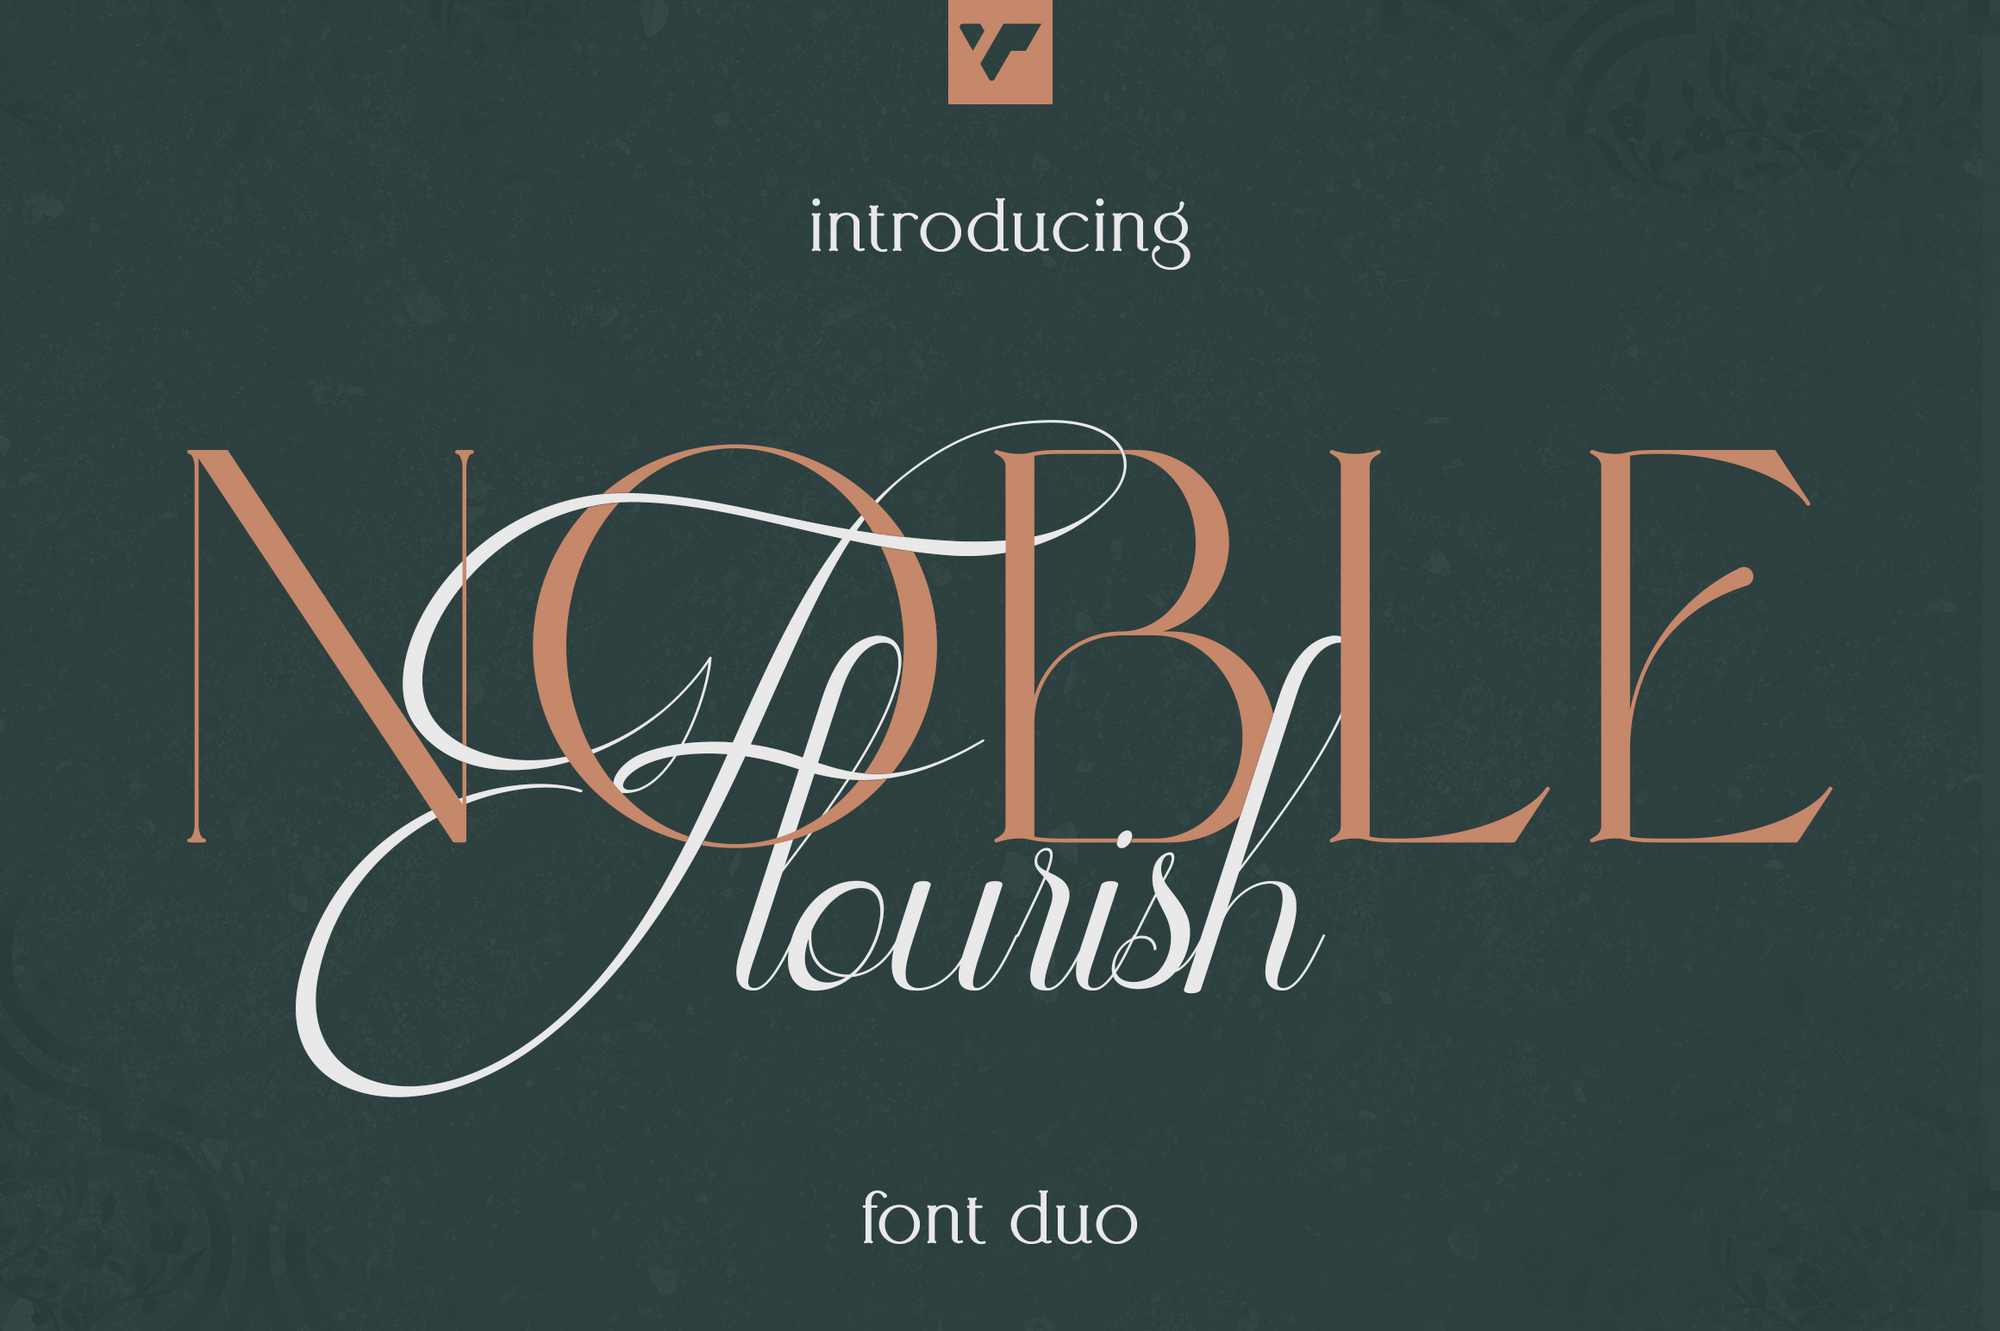 free flourishes fonts to download